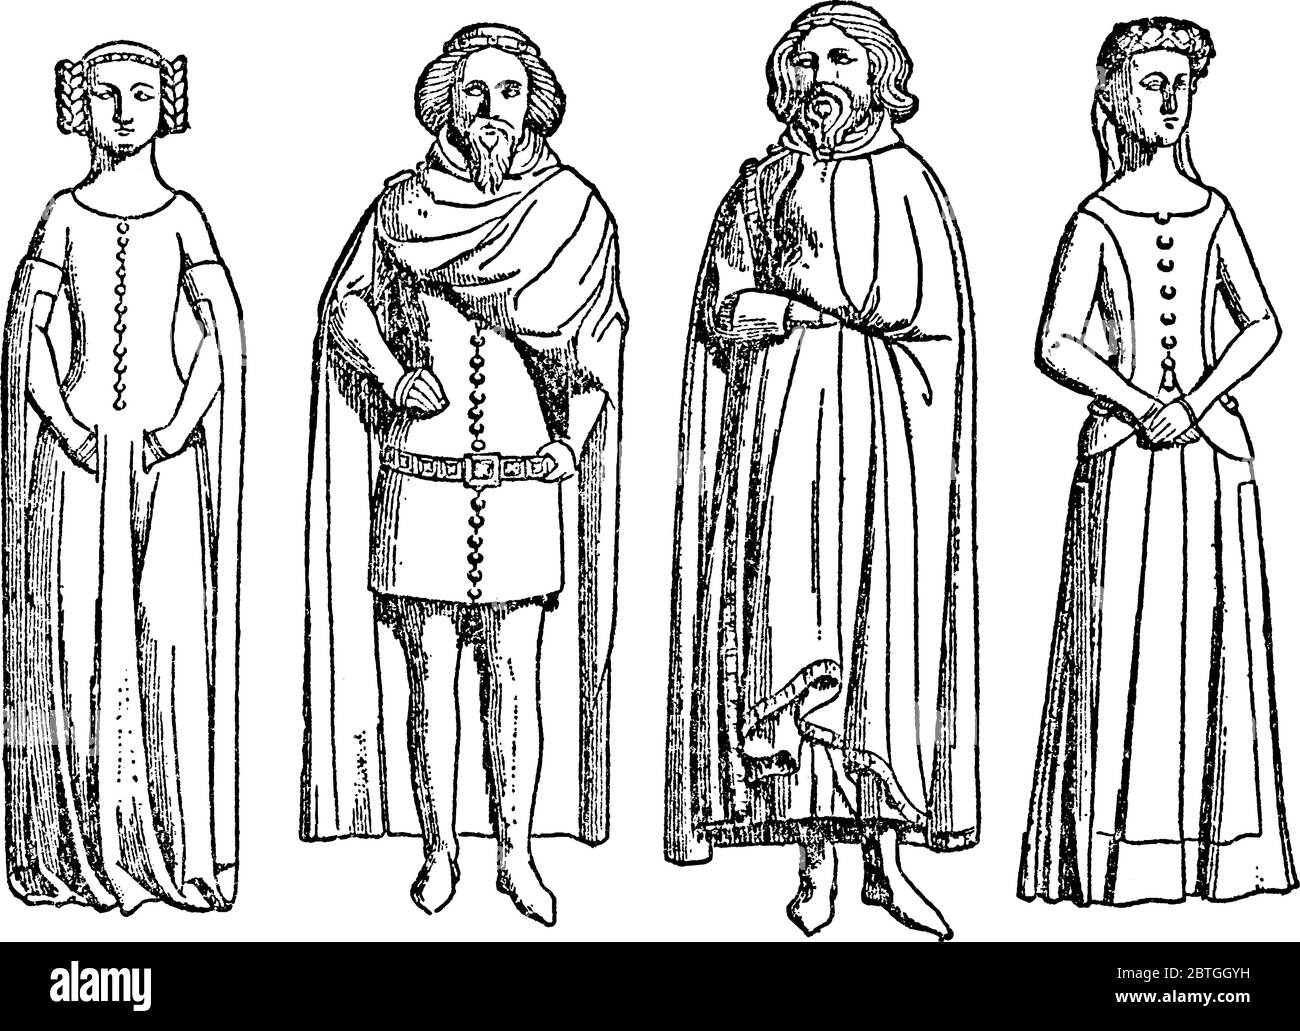 An illustration of King Edward and his children, Eleanor, Edward, John, and Joanna, vintage line drawing or engraving illustration. Stock Vector